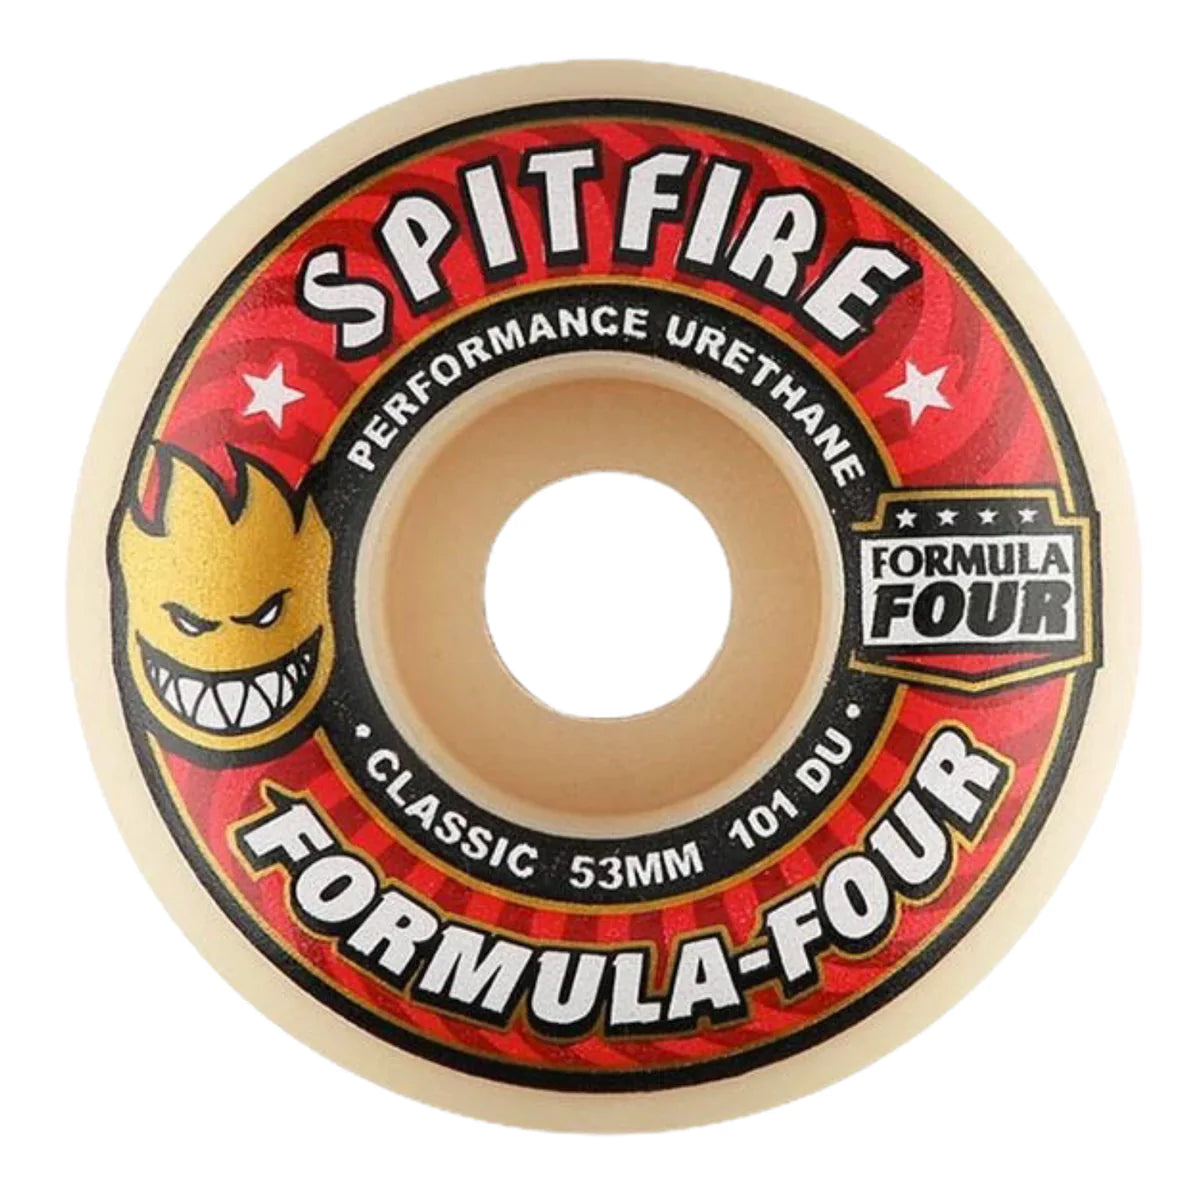 Spitfire F4 101 Conical Full Wheels (Set of 4)